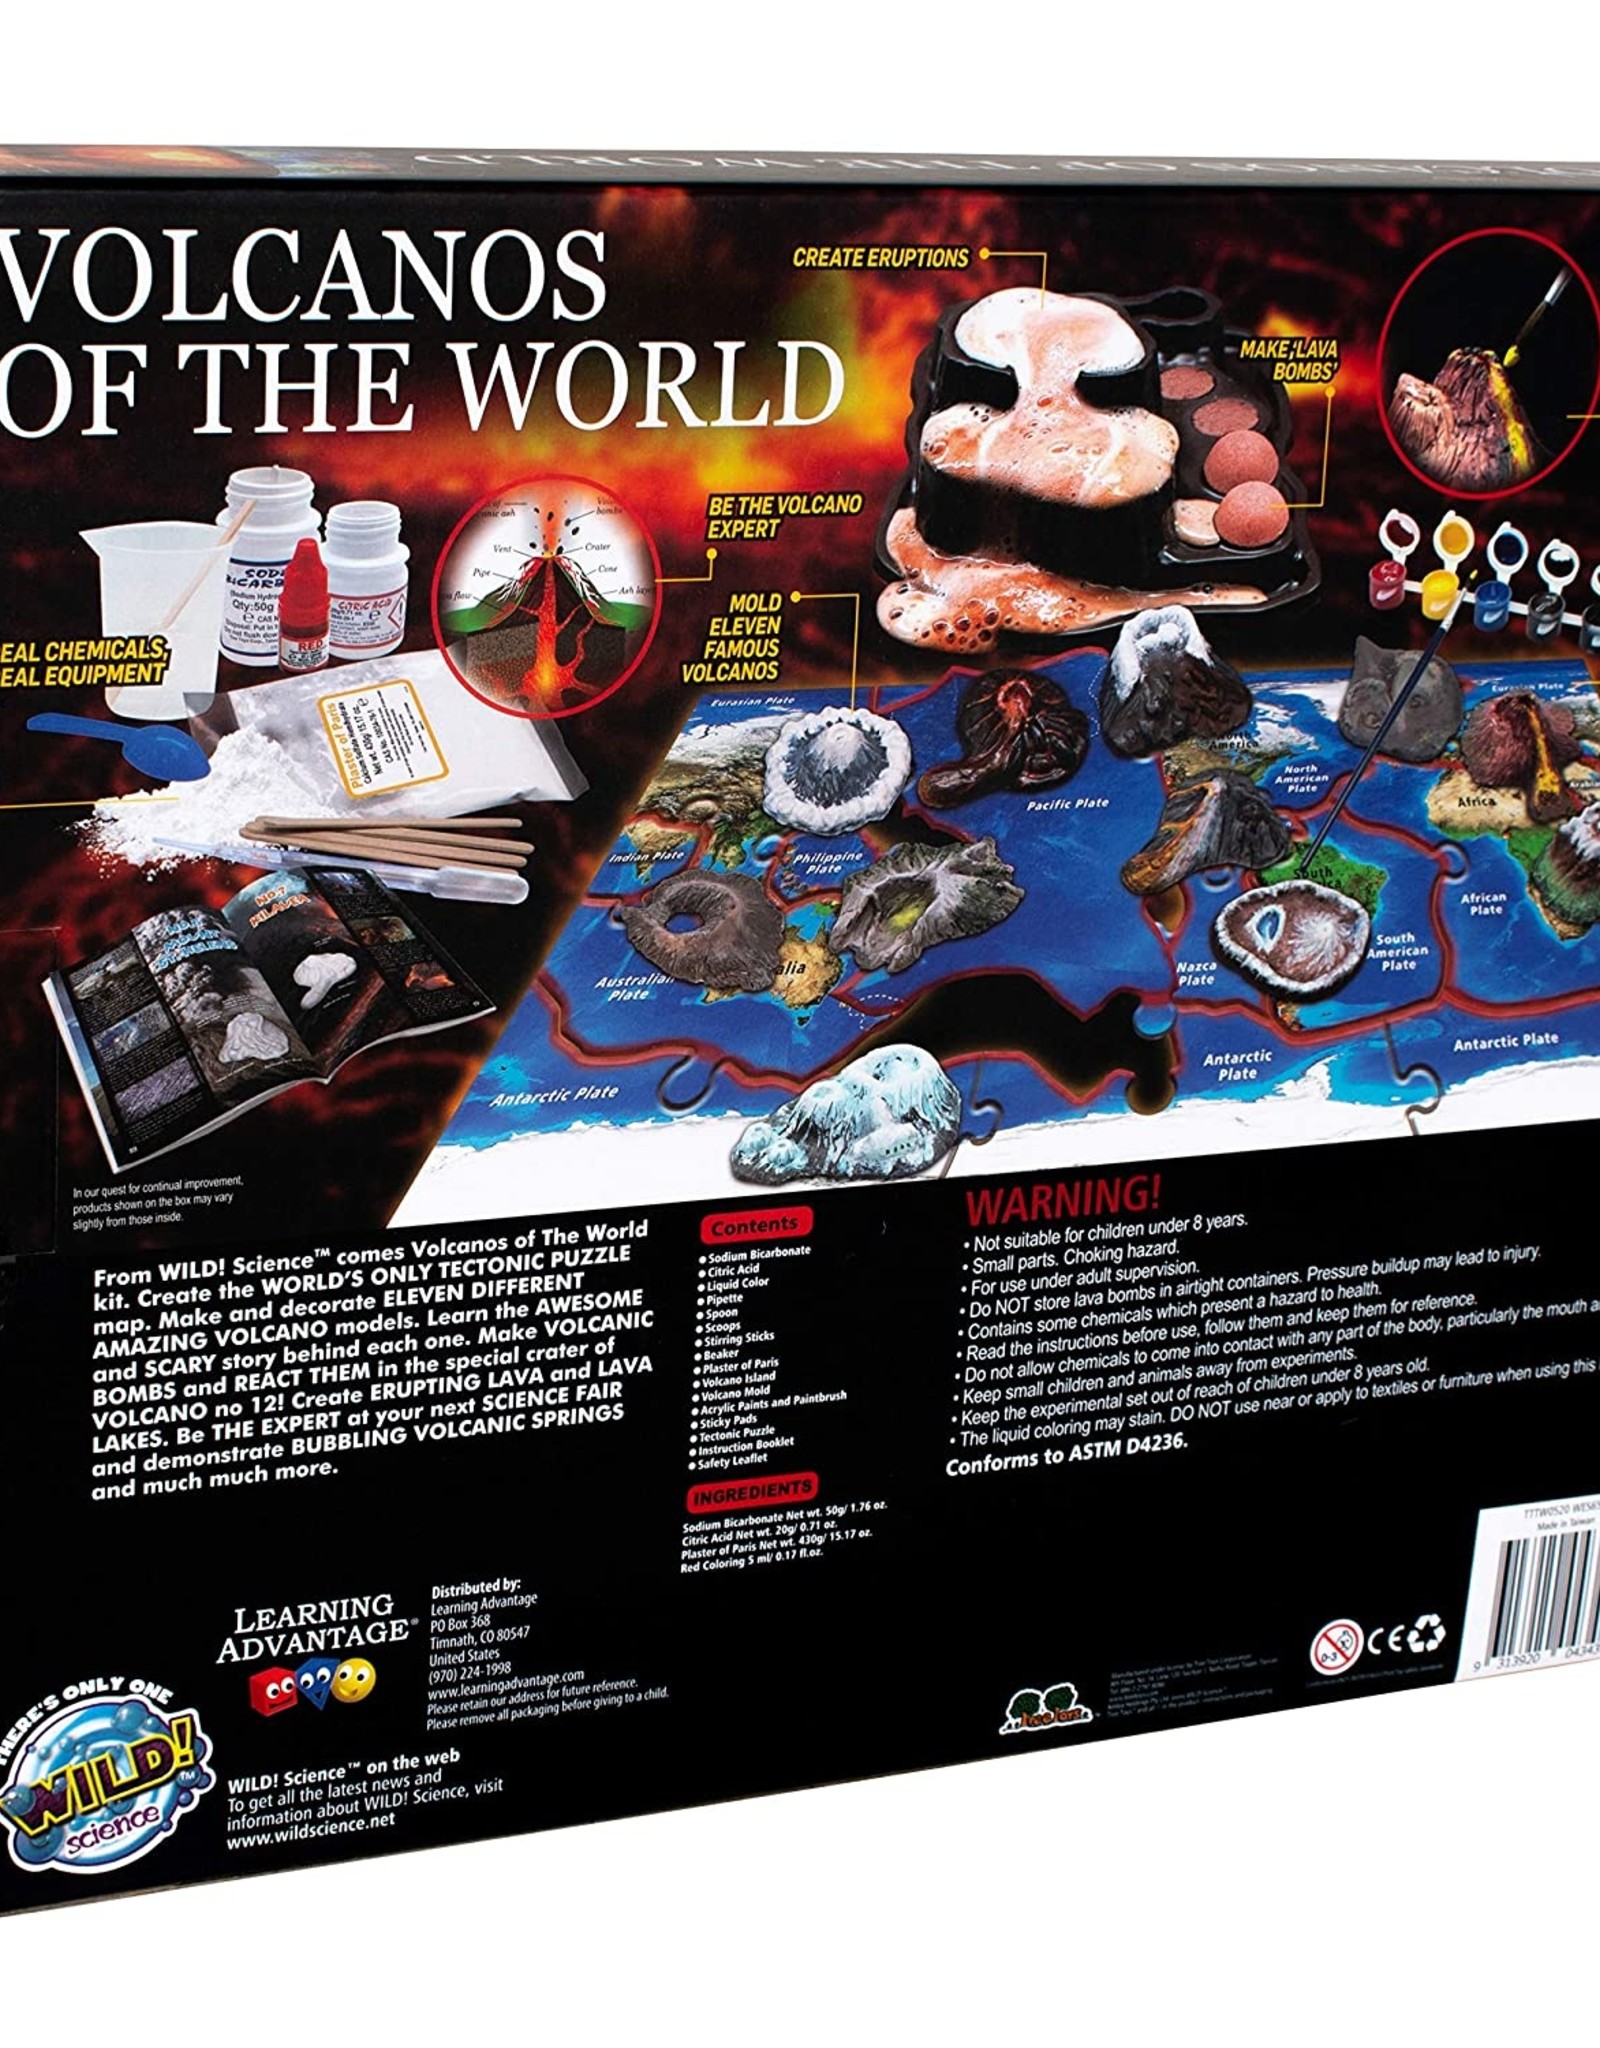 Volcanos of the World/WES65XL